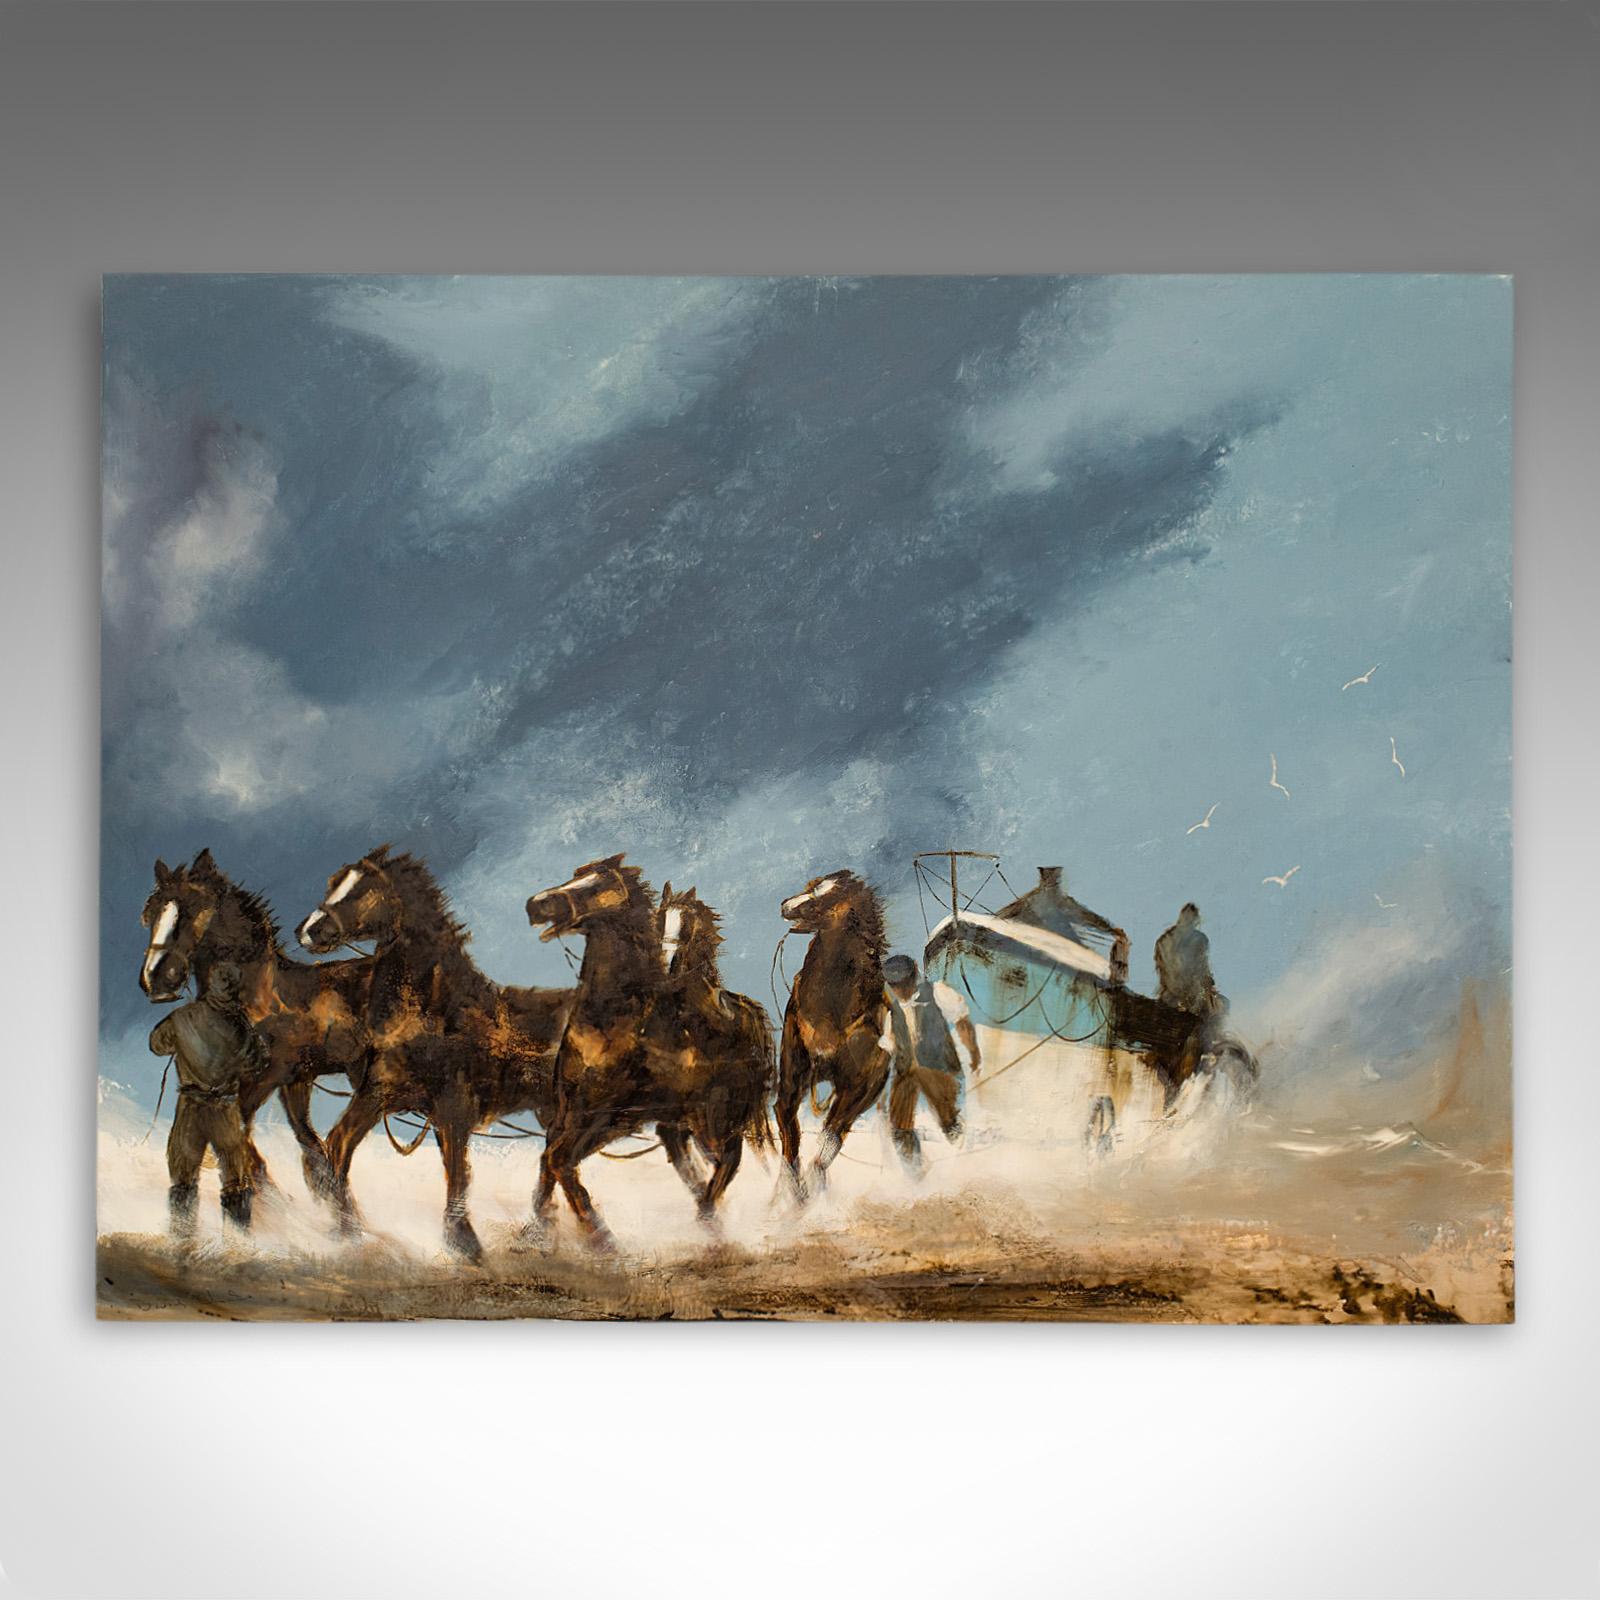 This is a large, beach landscape oil painting by the renowned marine and equine artist David Chambers. 'Launch' is an original, oil on board painting from David's recent collection.

A cadre of magnificent horses pulls a lifeboat launch into the